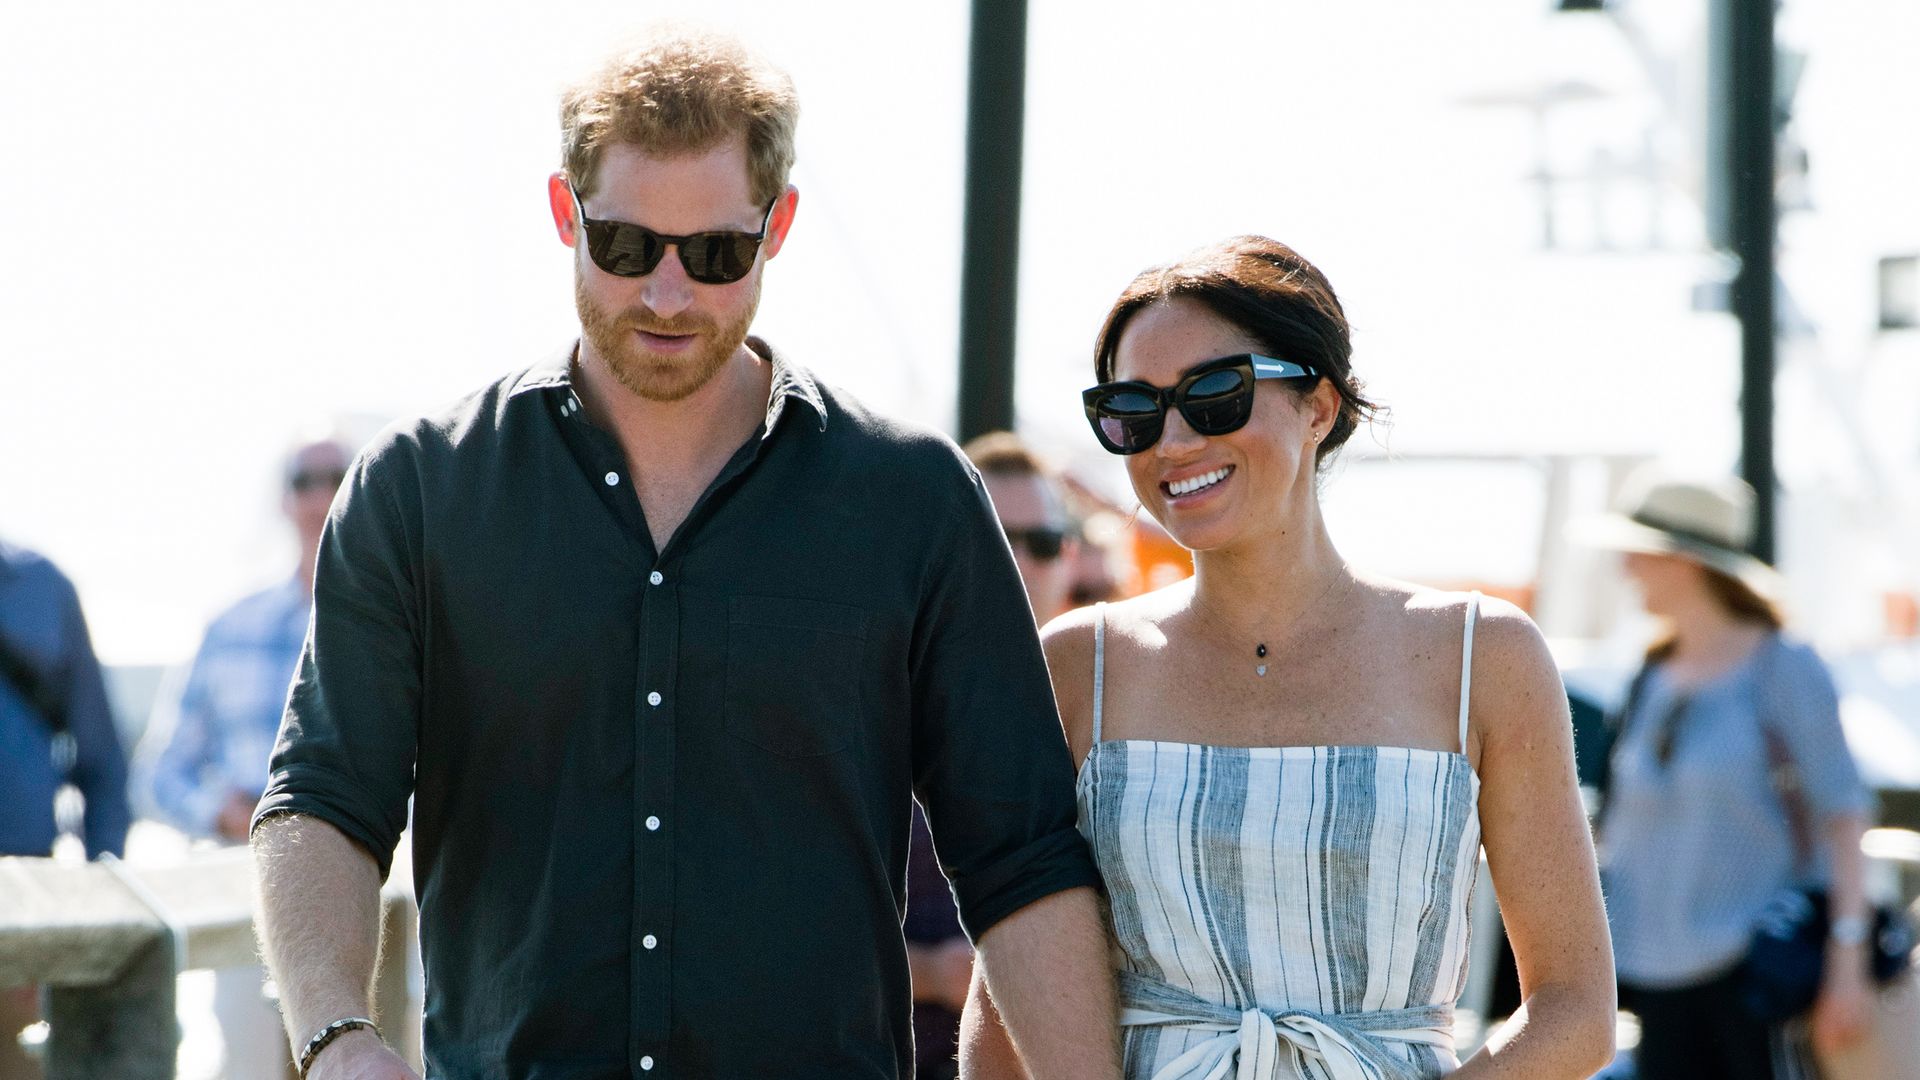 FRASER ISLAND, QUEENSLAND - OCTOBER 22:  (NO UK SALES FOR 28 DAYS) Prince Harry, Duke of Sussex and Meghan, Duchess of Sussex visit Kingfisher Bay Resort on October 22, 2018 in Fraser Island, Australia. The Duke and Duchess of Sussex are on their official 16-day Autumn tour visiting cities in Australia, Fiji, Tonga and New Zealand.  (Photo by Pool/Samir Hussein/WireImage)